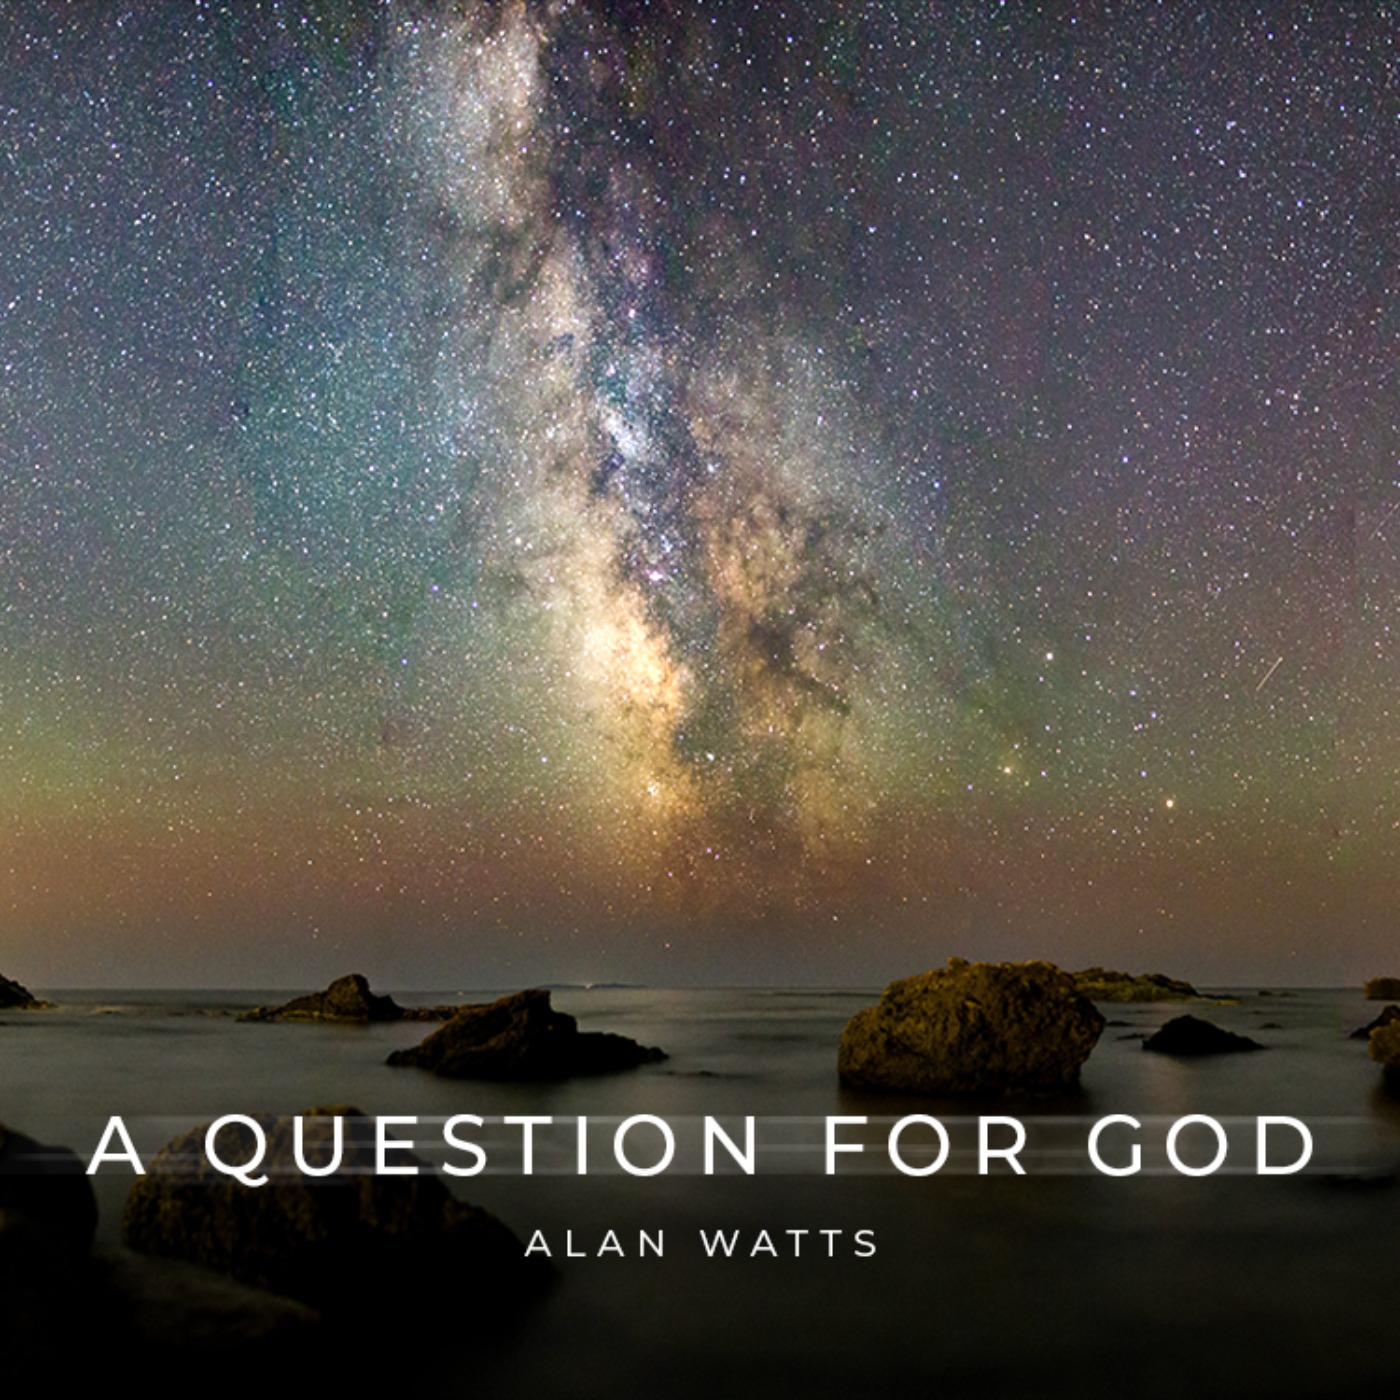 What if You Could Interview God?